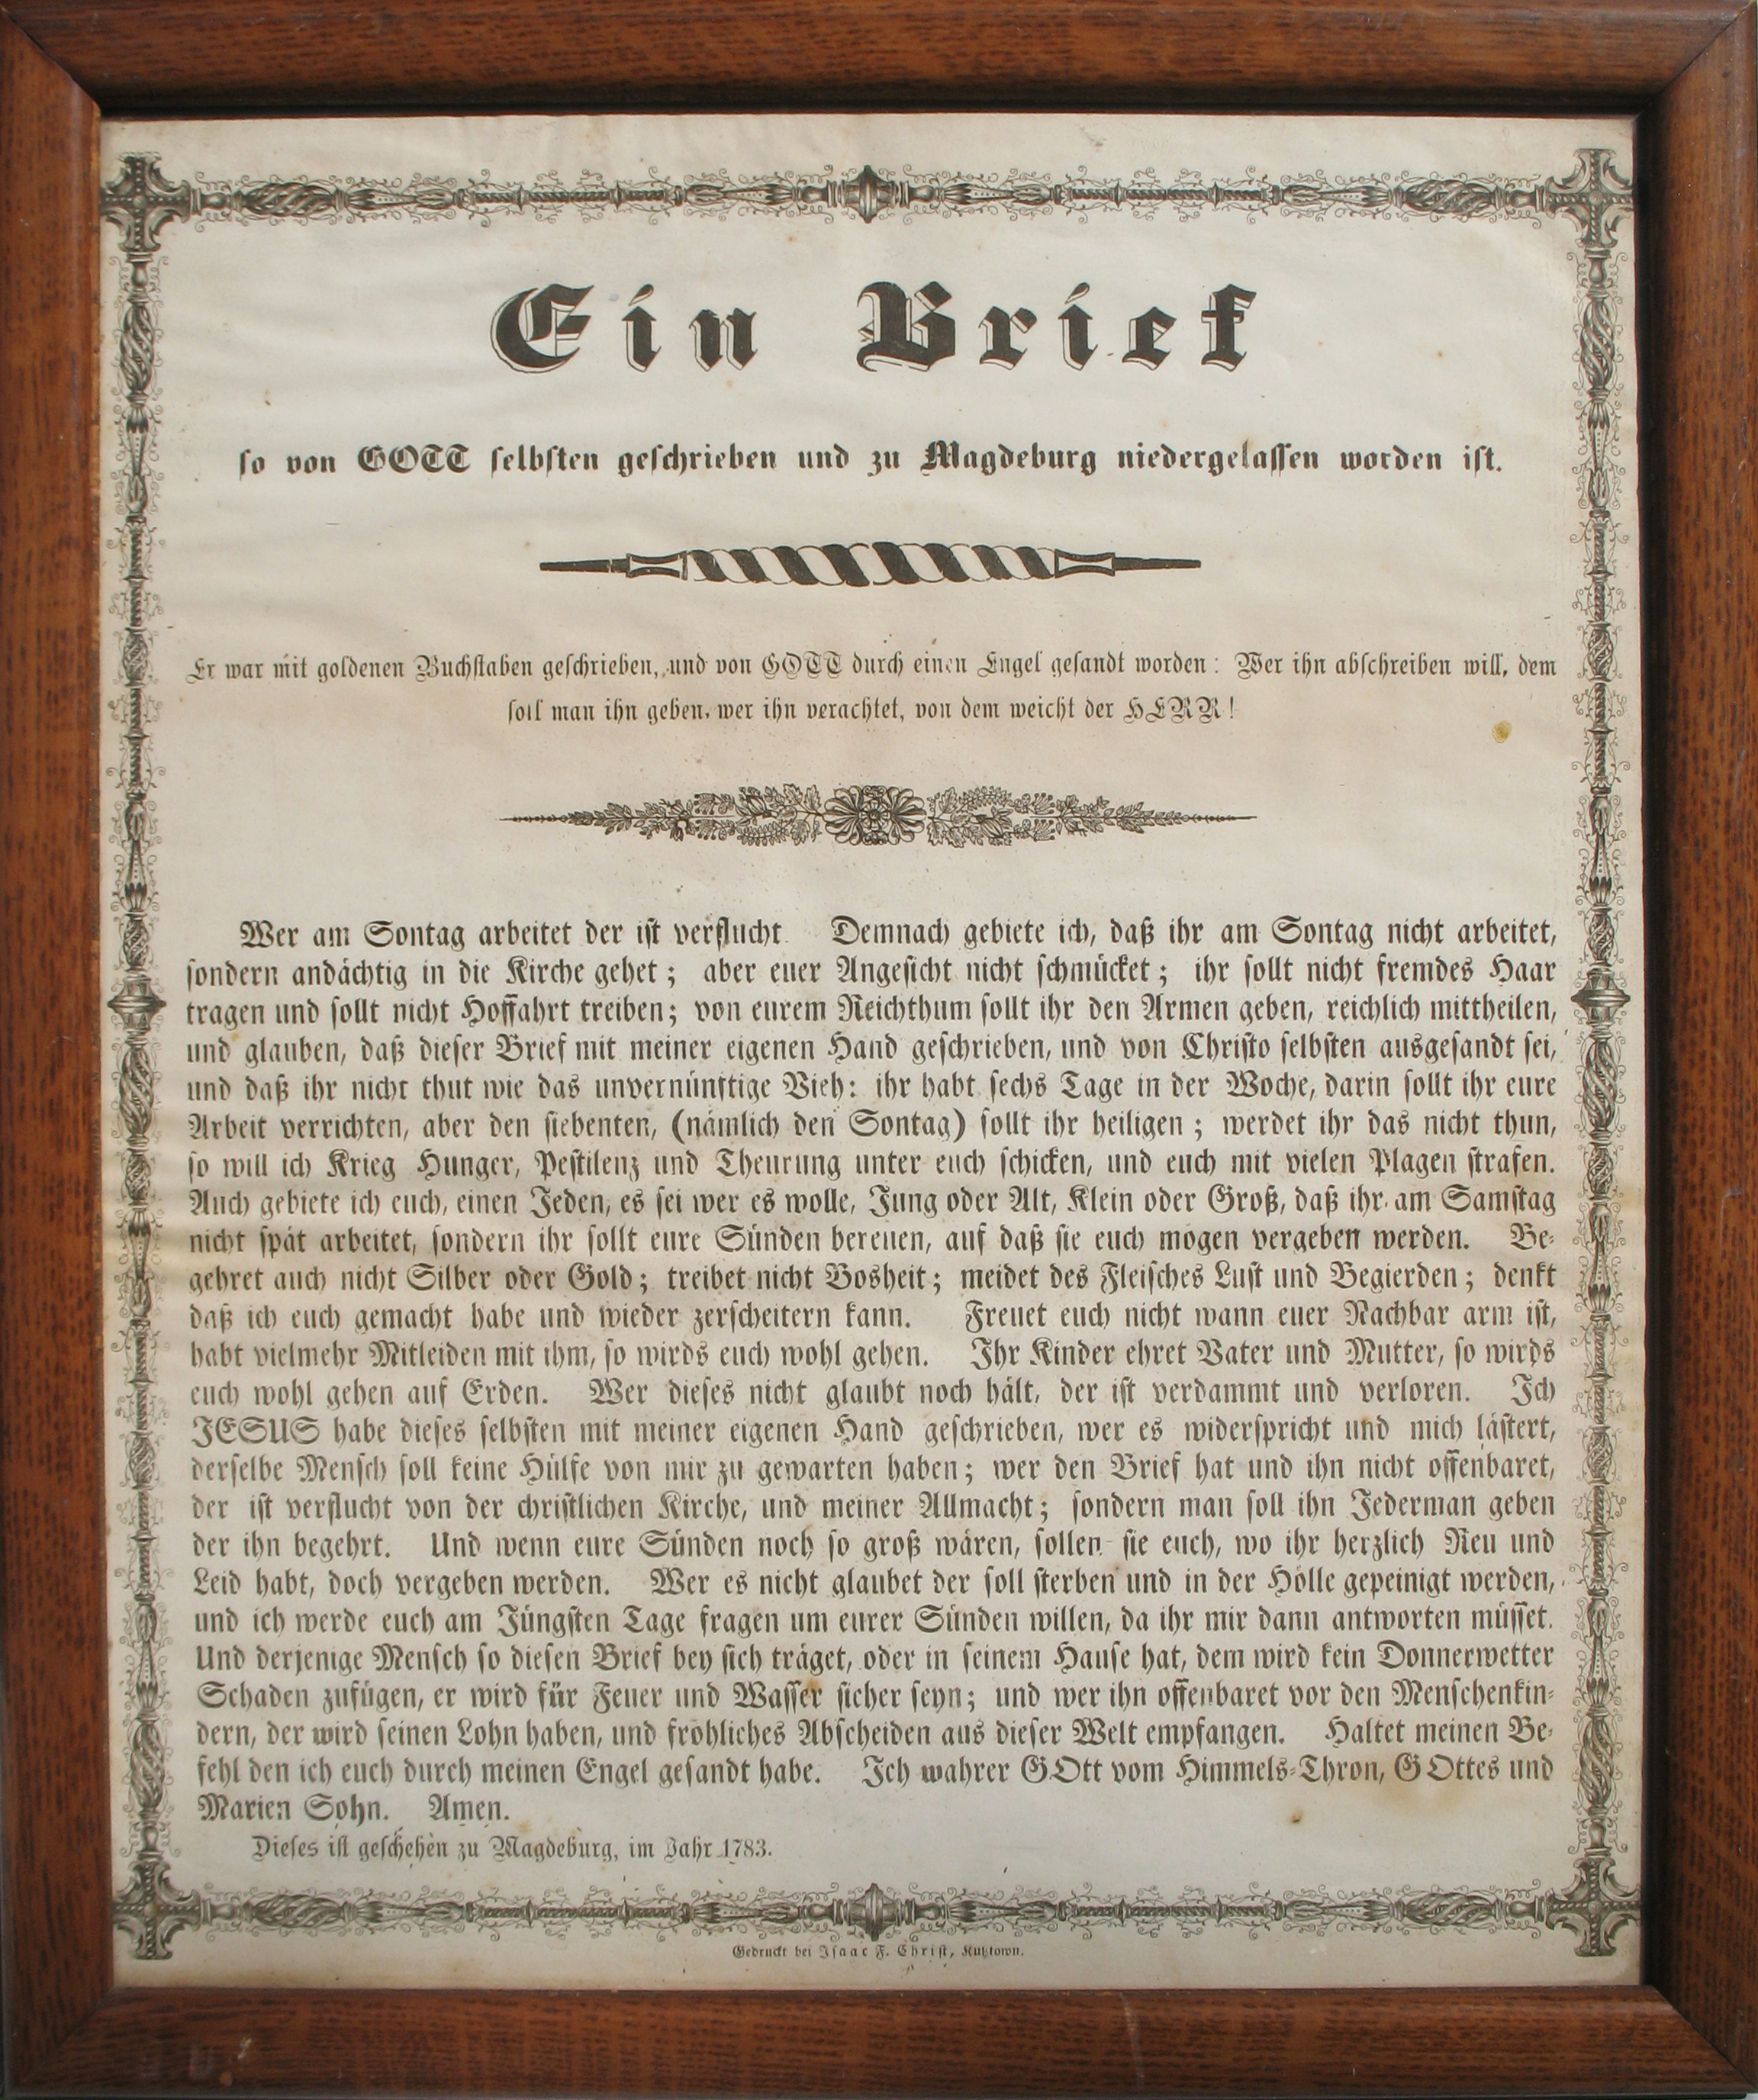 A rectangular document in a wooden frame, this Himmelsbrief is printed in German script with black ink. The border is decorated with black and gray columns that look to be wrought ironwork with vines extending off. There are two small decorative motifs before the main text. One is a black and white twisted shape while the other is a floral arrangement.